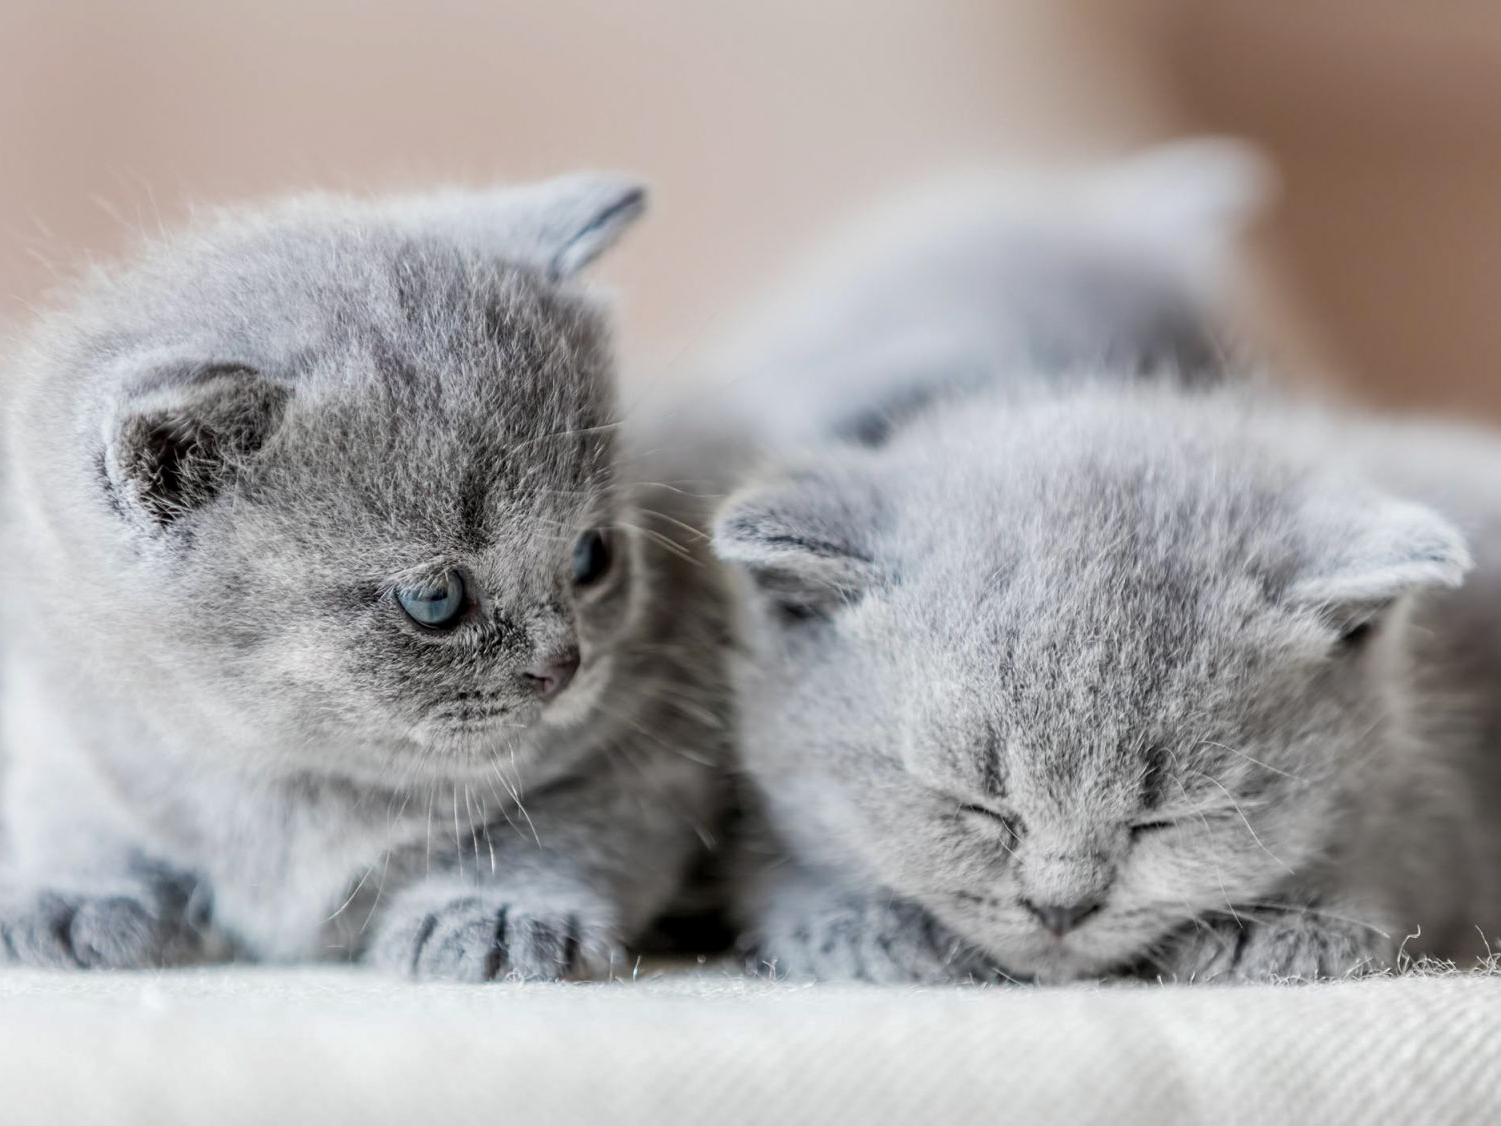 British shorthair kittens lying together indoors